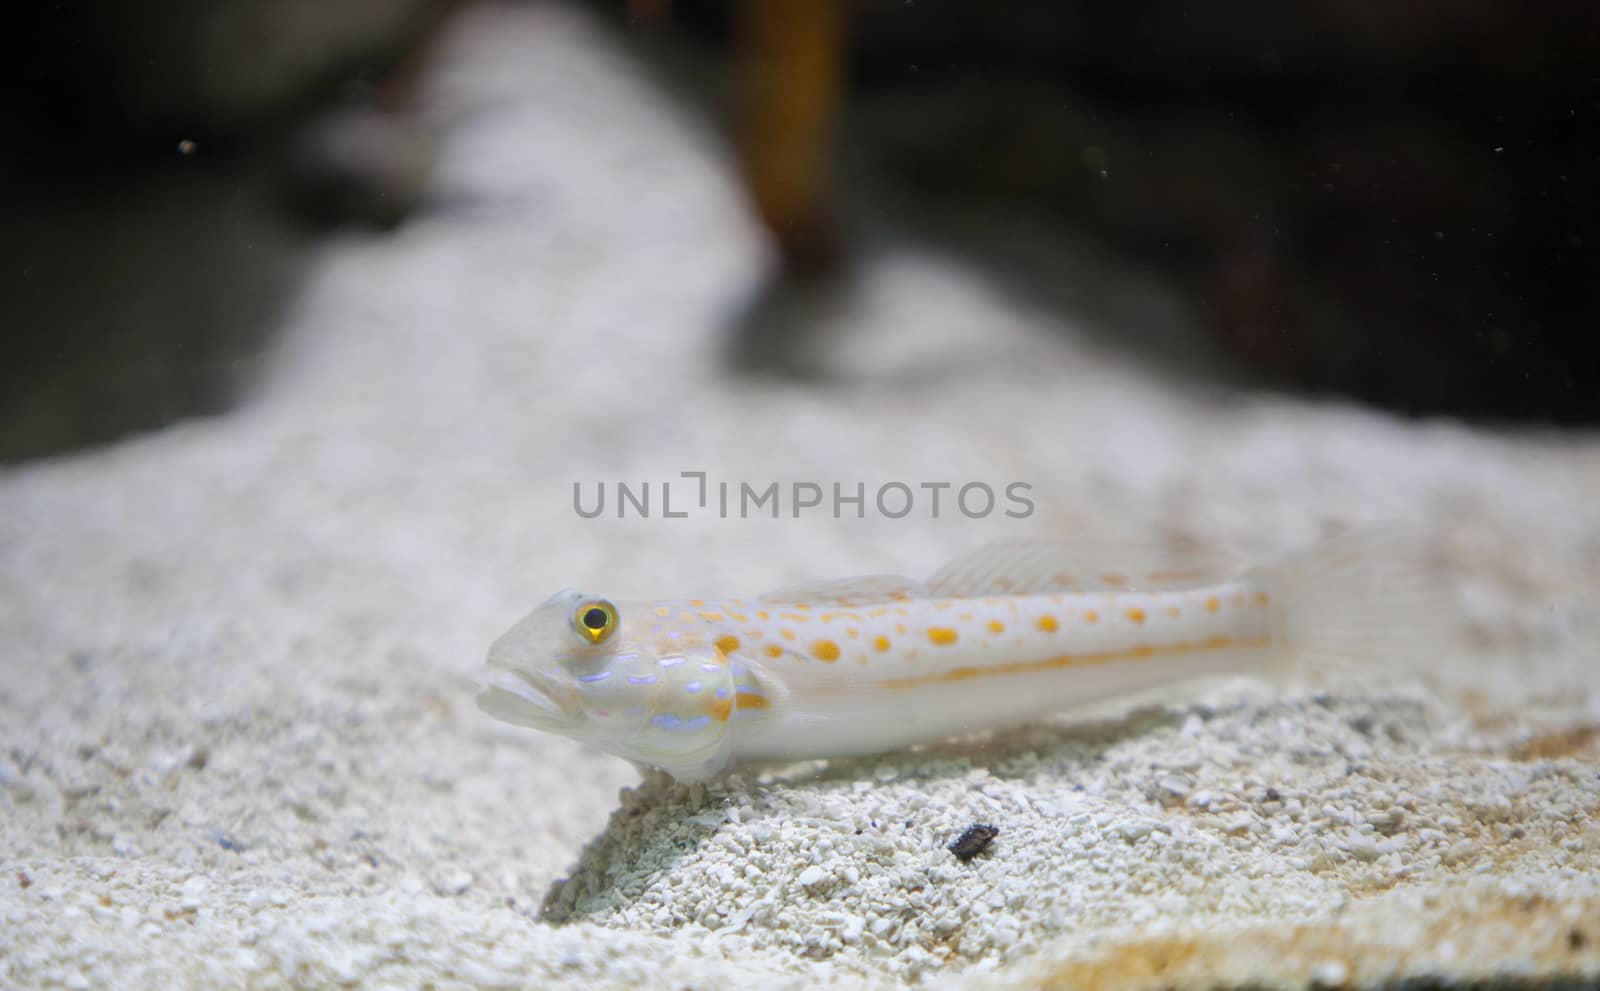 Maiden goby, Valenciennea puellaris, also called the orange spotted sleeper goby, sifts through the sand for food